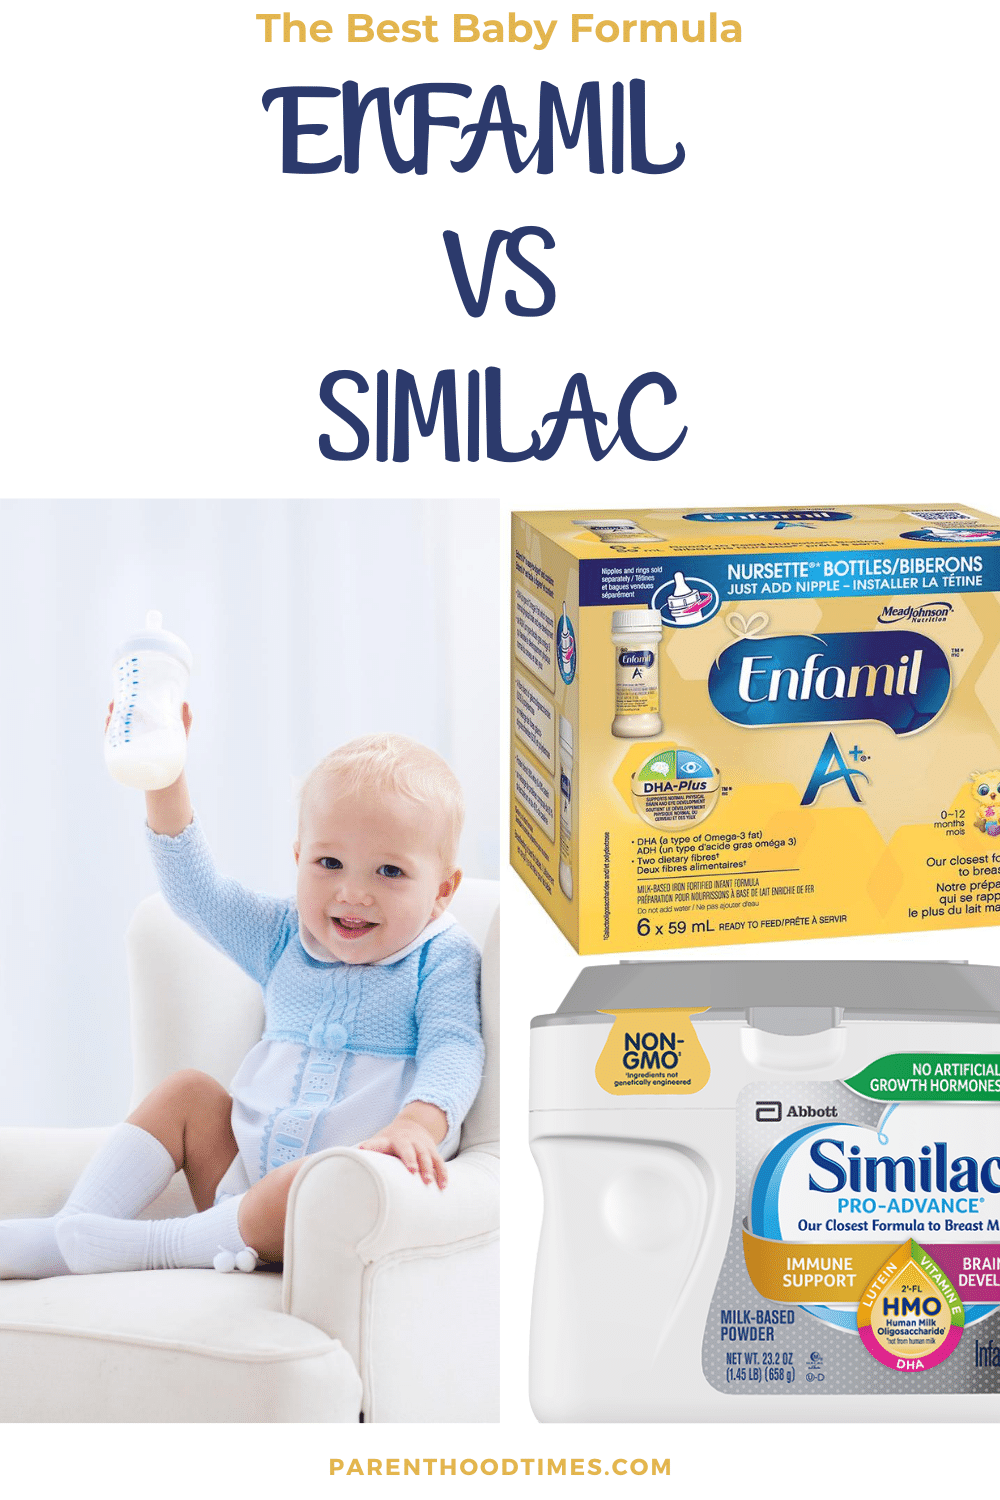 Enfamil Vs Similac Comparison: Which Baby Formula is Better in 2021 ...